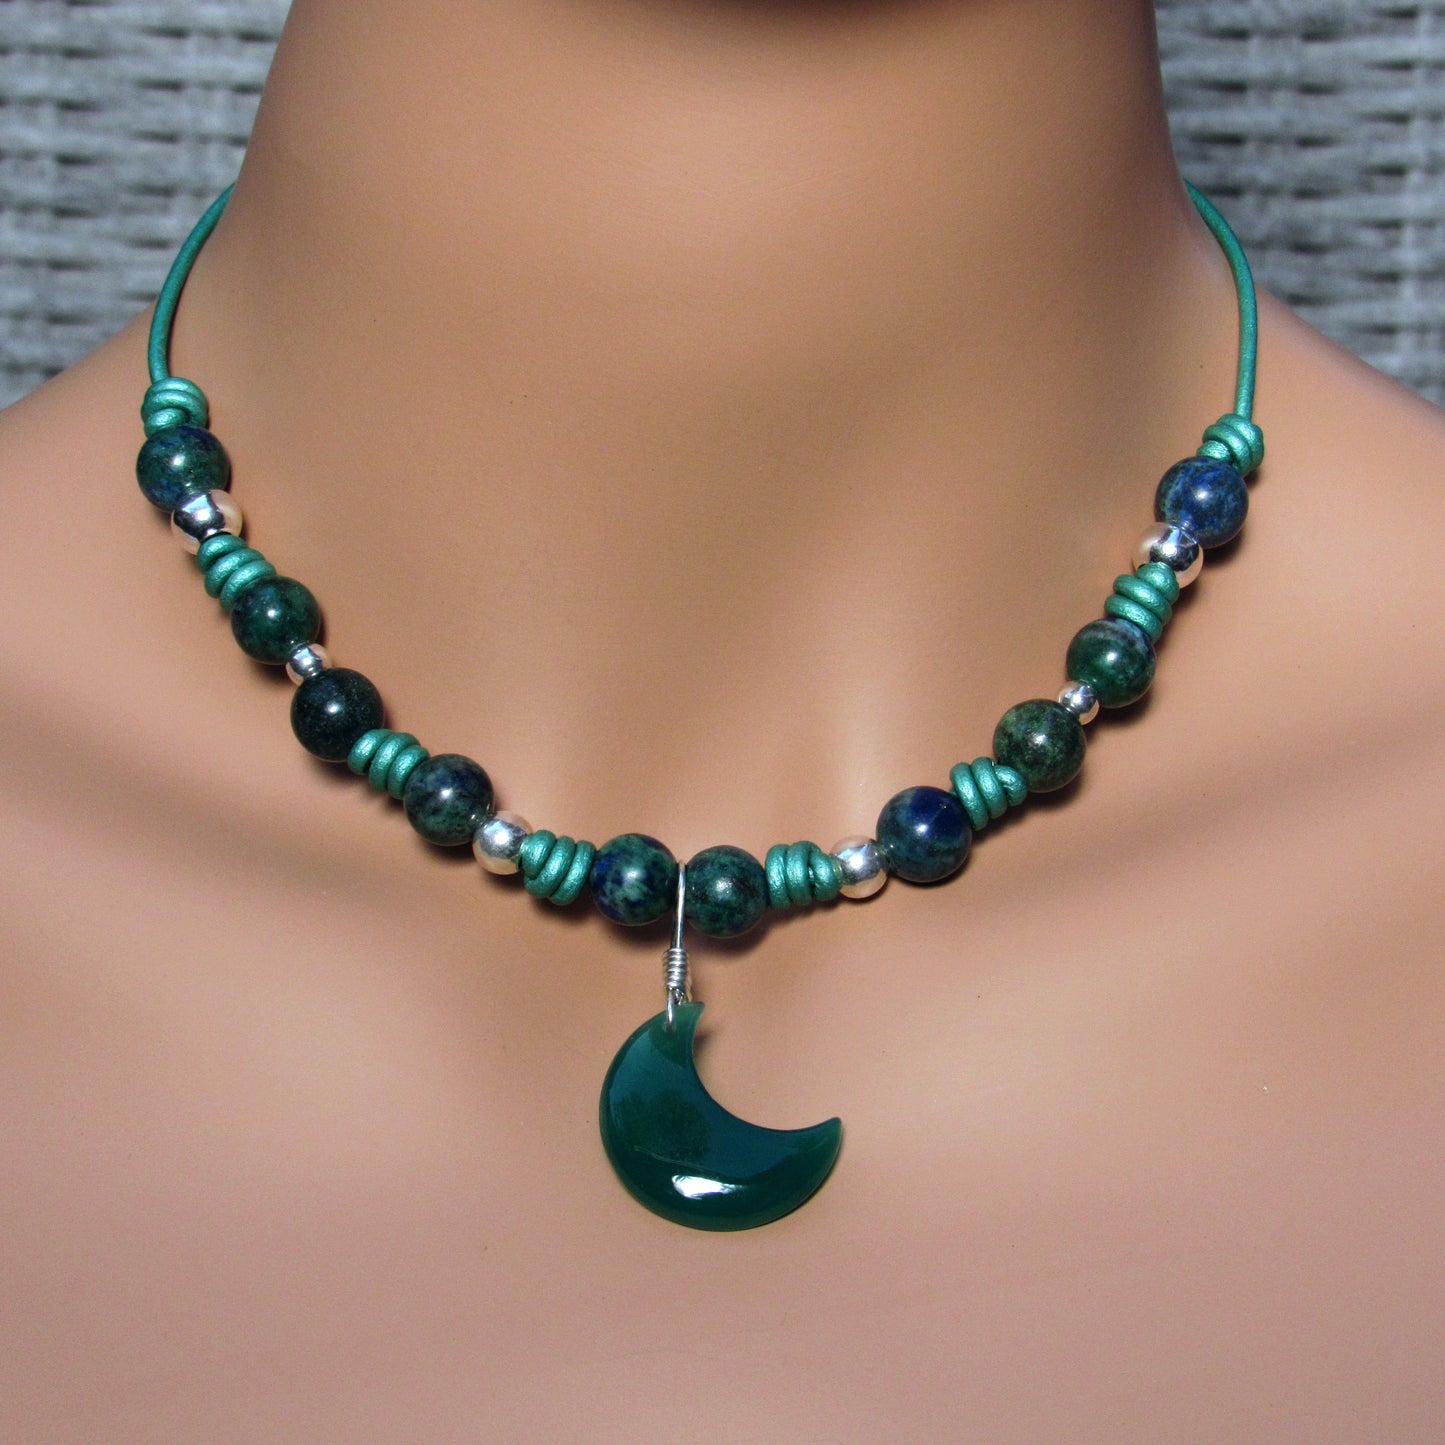 Green Onyx gemstone Moon, Lapis Lazuli Chrysocolla Intrusion, Sterling Silver, on Leather Necklace